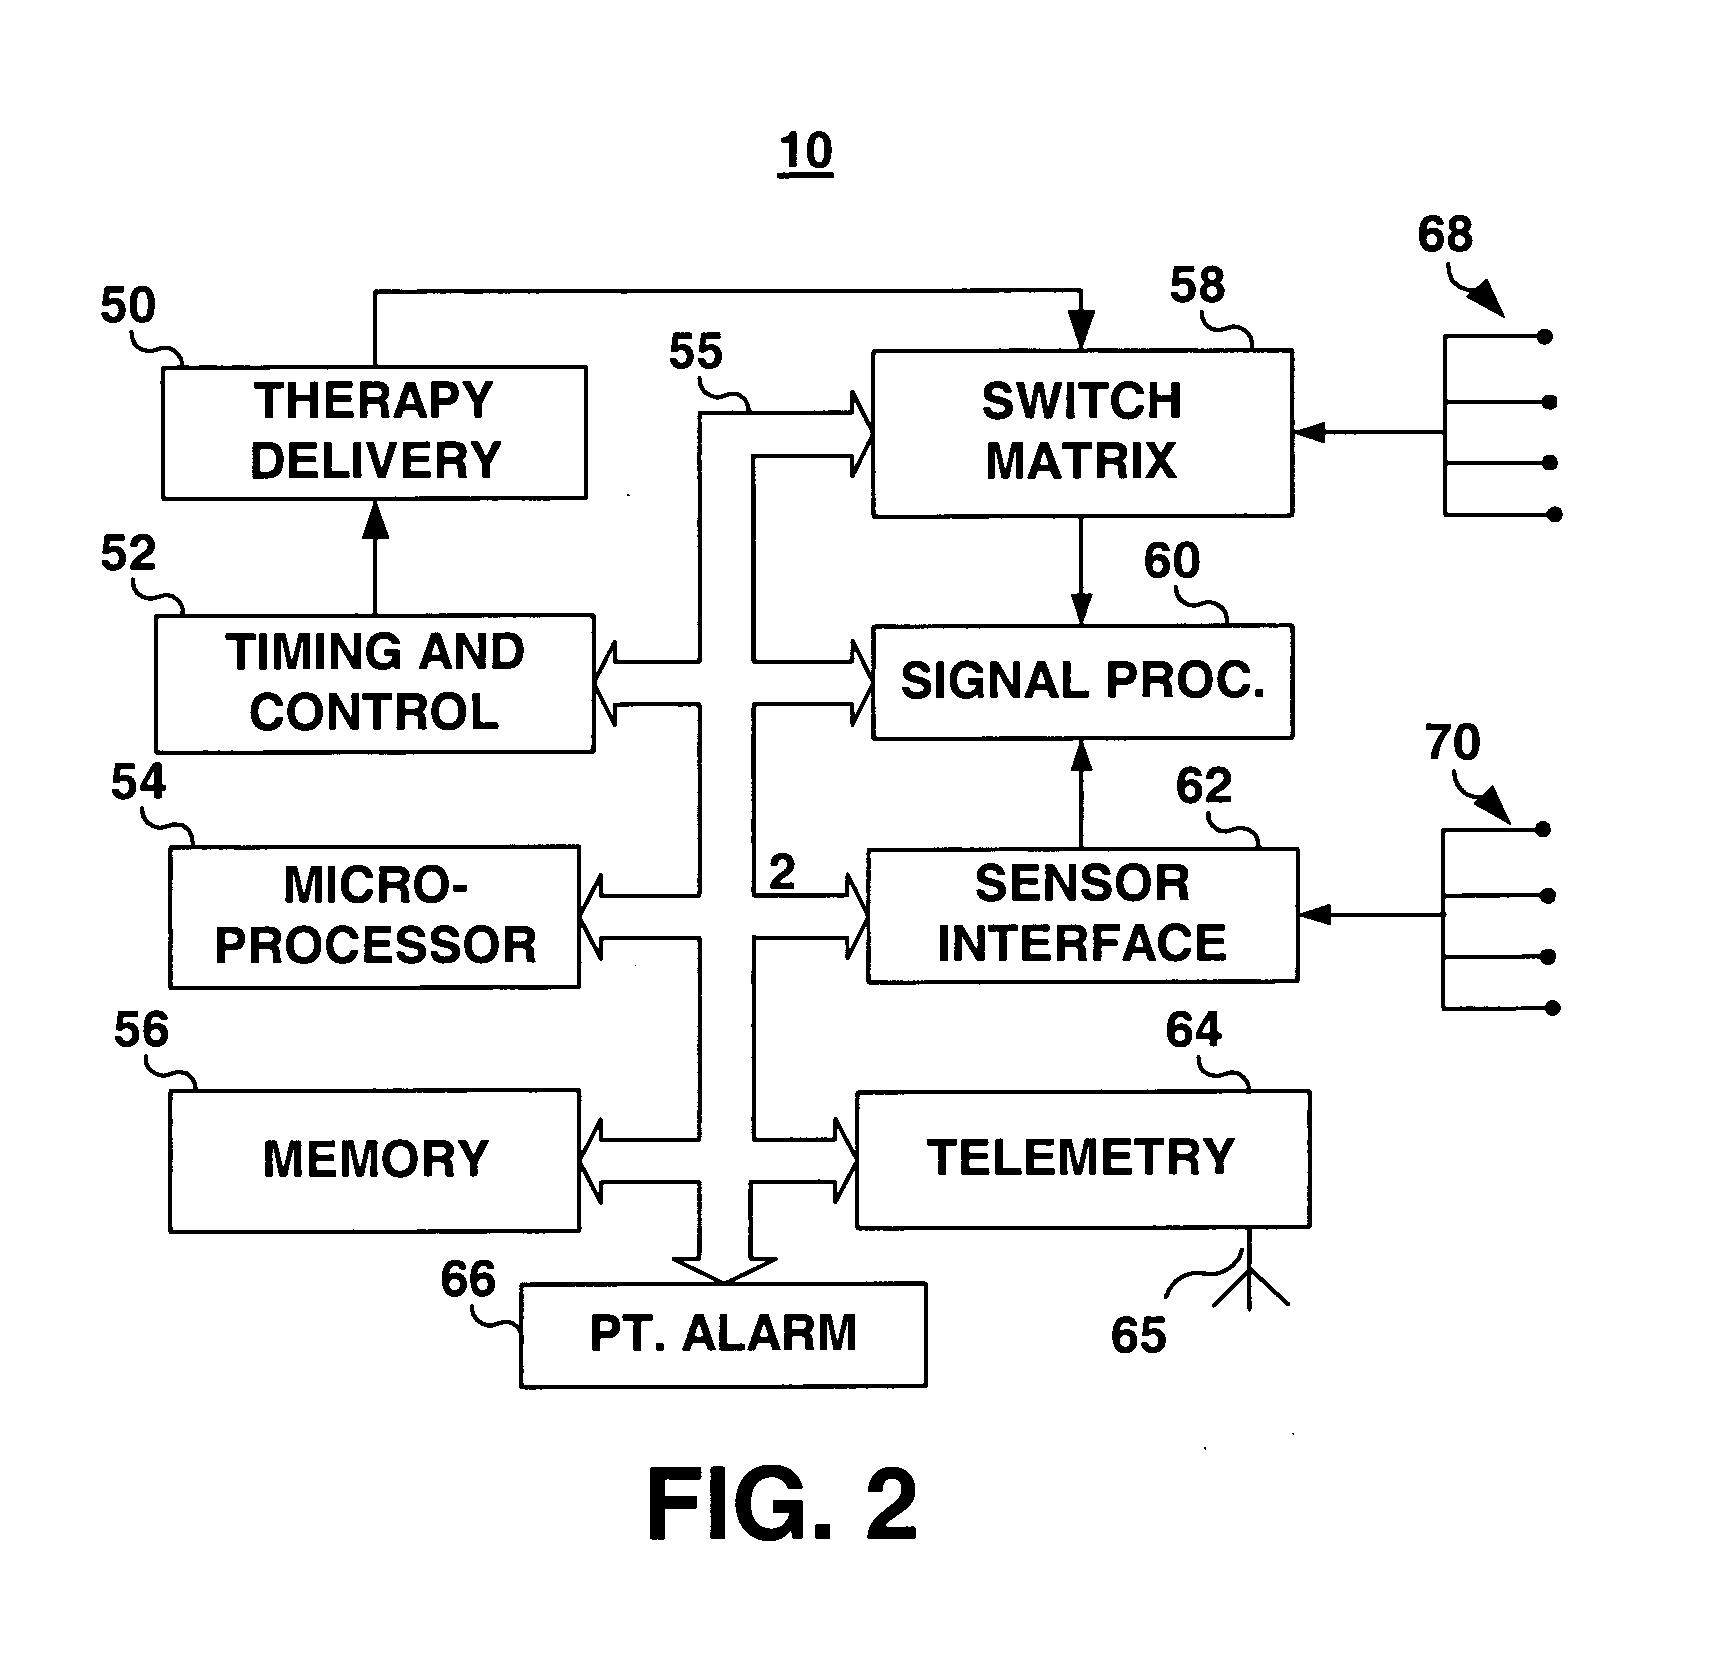 Communications system for an implantable device and a drug dispenser